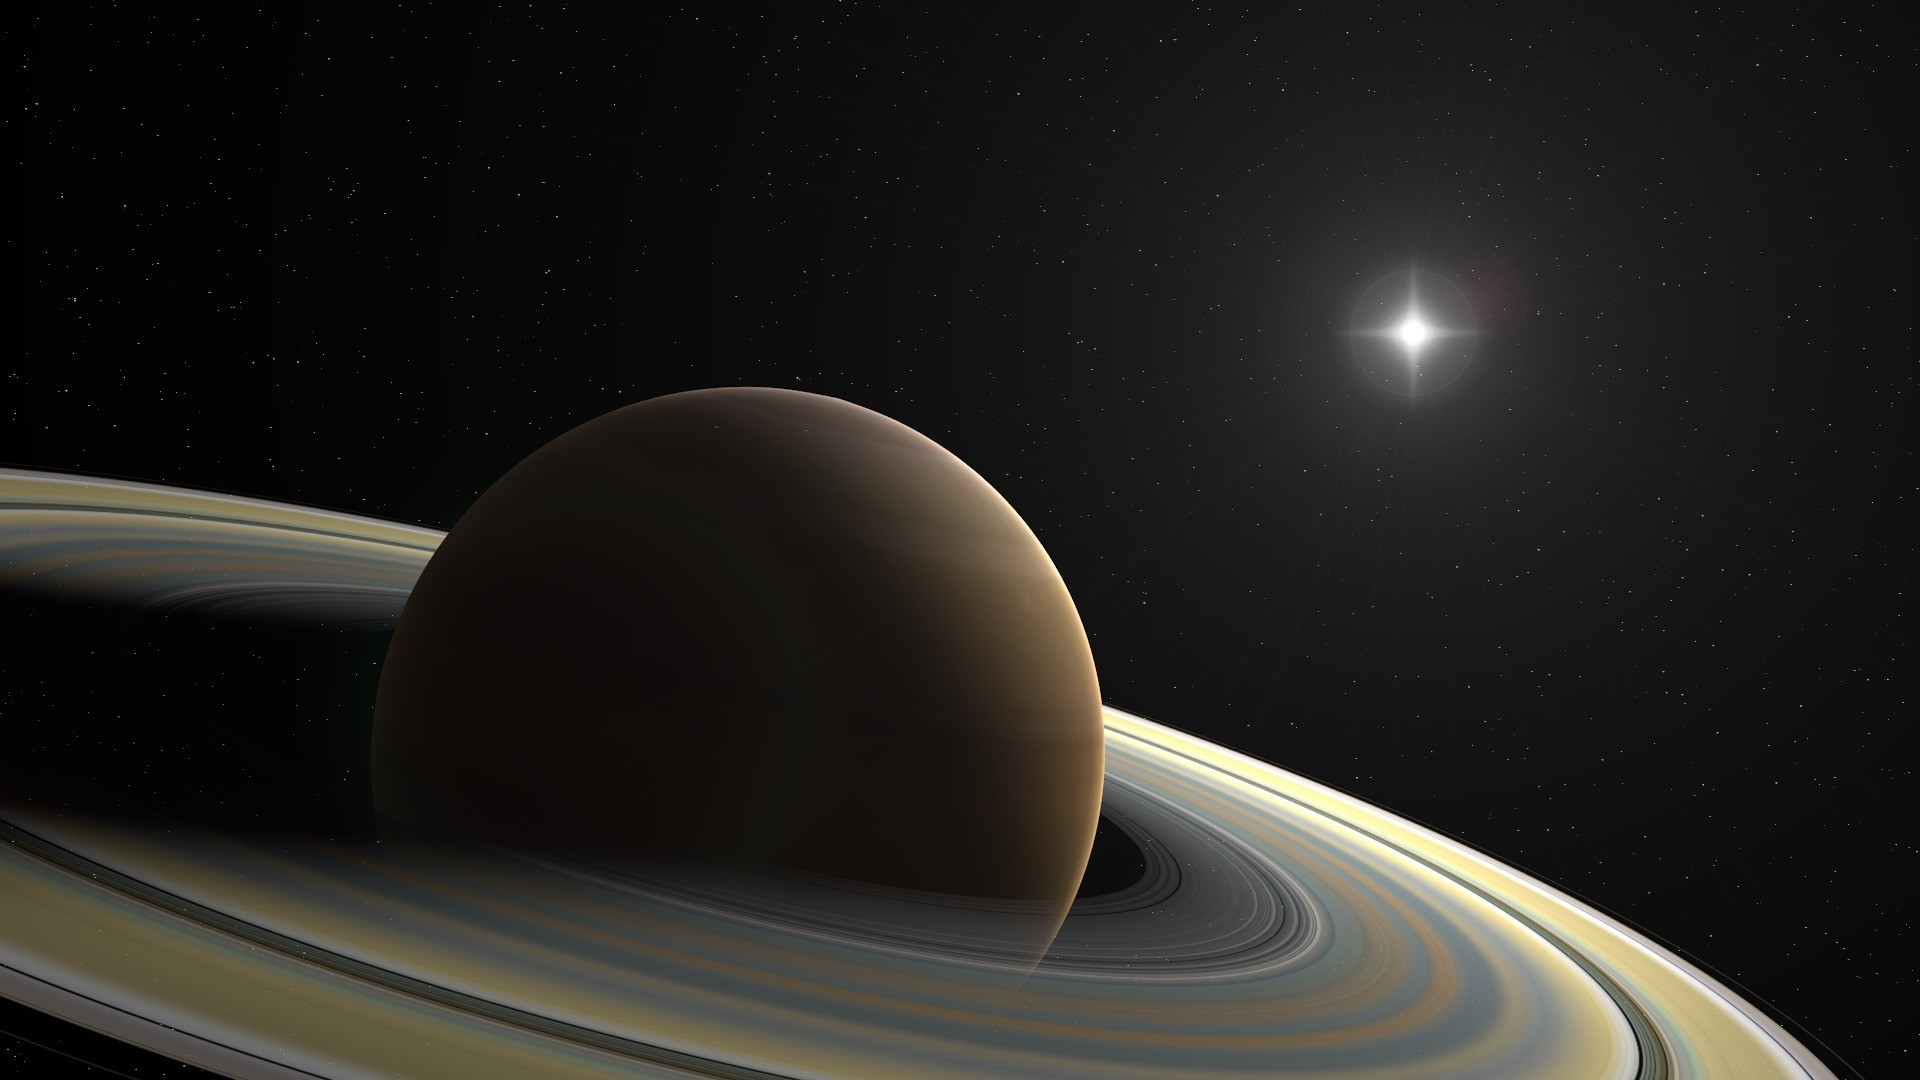 1920x1080 Wallpaper : planet, vehicle, Saturn, astronomy, ring, star, theatre, screenshot, atmosphere of earth, outer space, astronomical object wallup 586878 HD Wallpapers